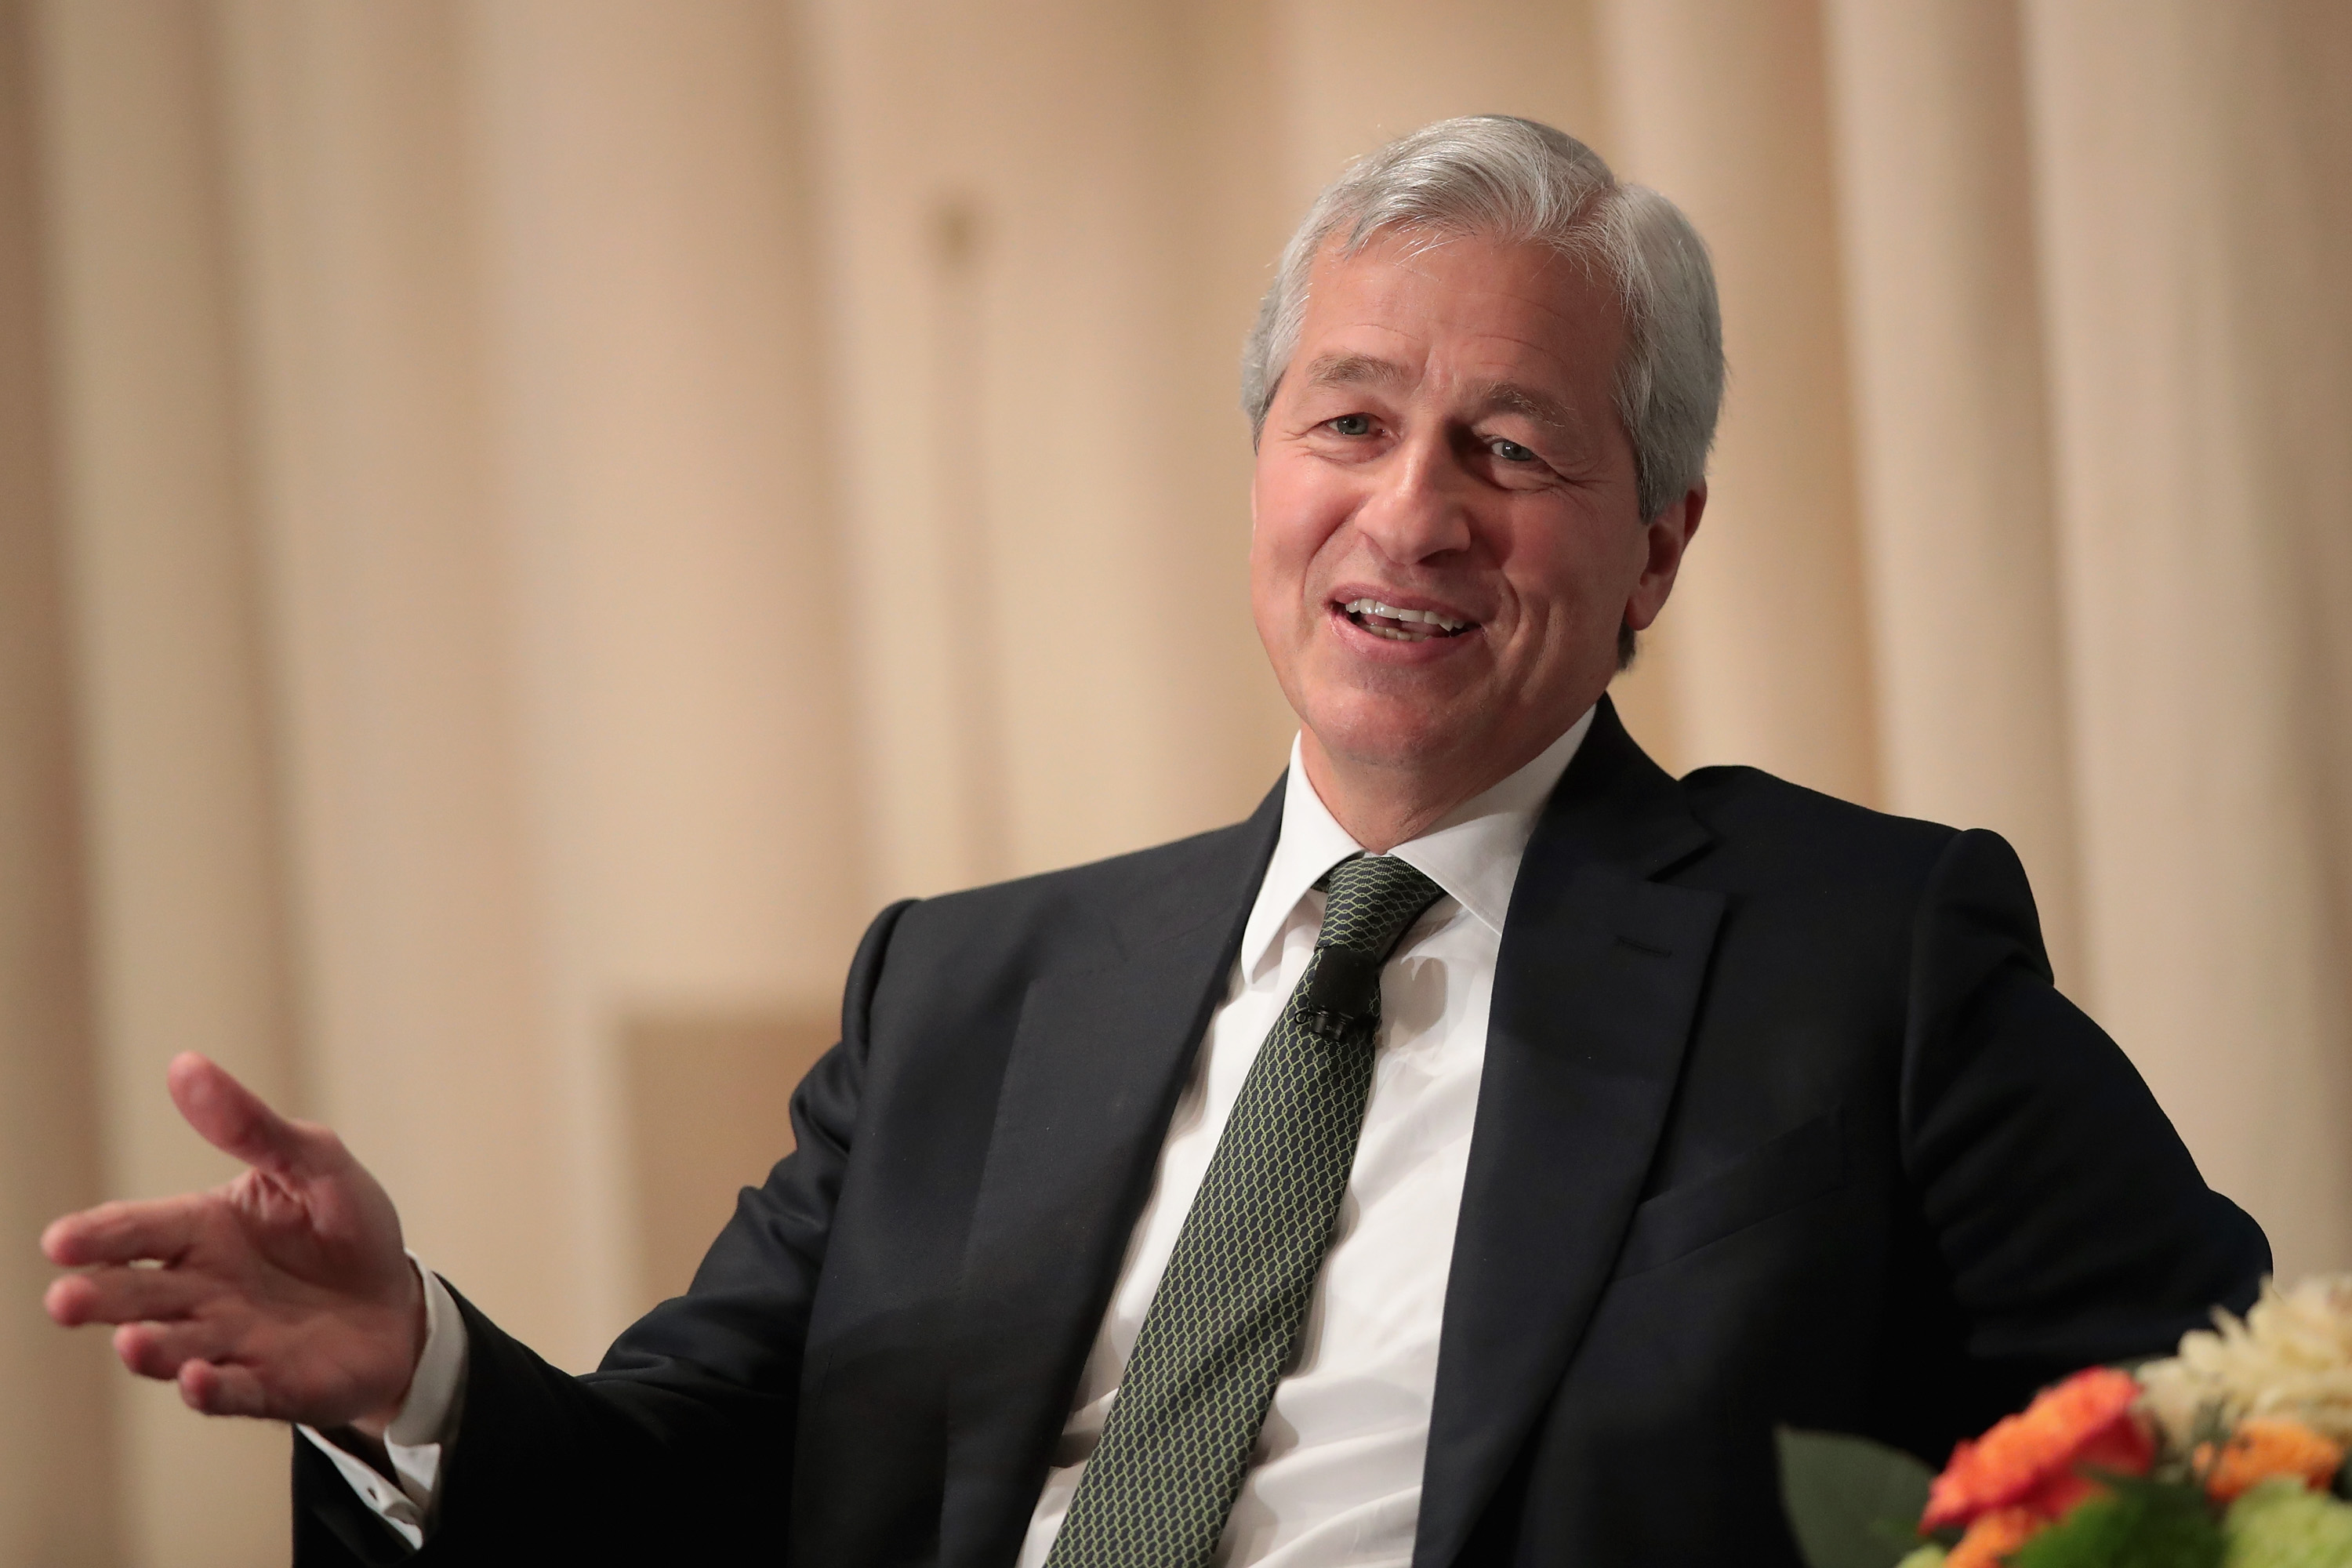 Jamie Dimon, Chairman and CEO of JPMorgan Chase & Co, fields questions from Mellody Hobson, president of Ariel Investments, during a luncheon hosted by The Economic Club of Chicago on November 22, 2017 in Chicago, Illinois. (Scott Olson—Getty Images)